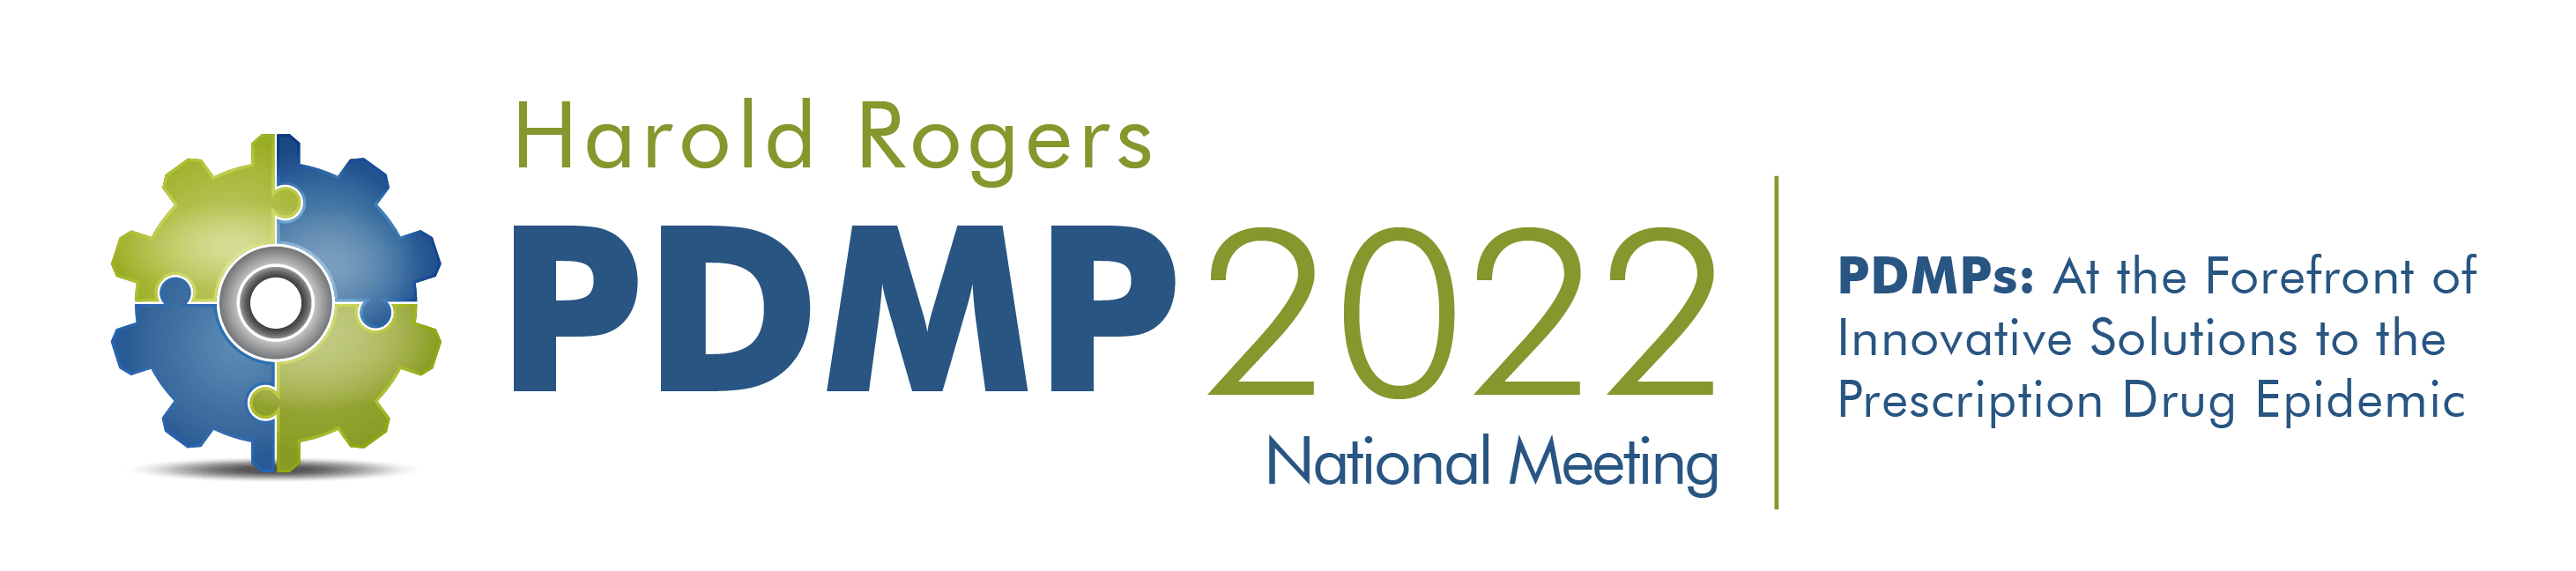 Harold Rogers PDMP 2022 National Meeting. PDMPs: At the Forefront of Innovative Solutions to the Prescription Drug Epidemic